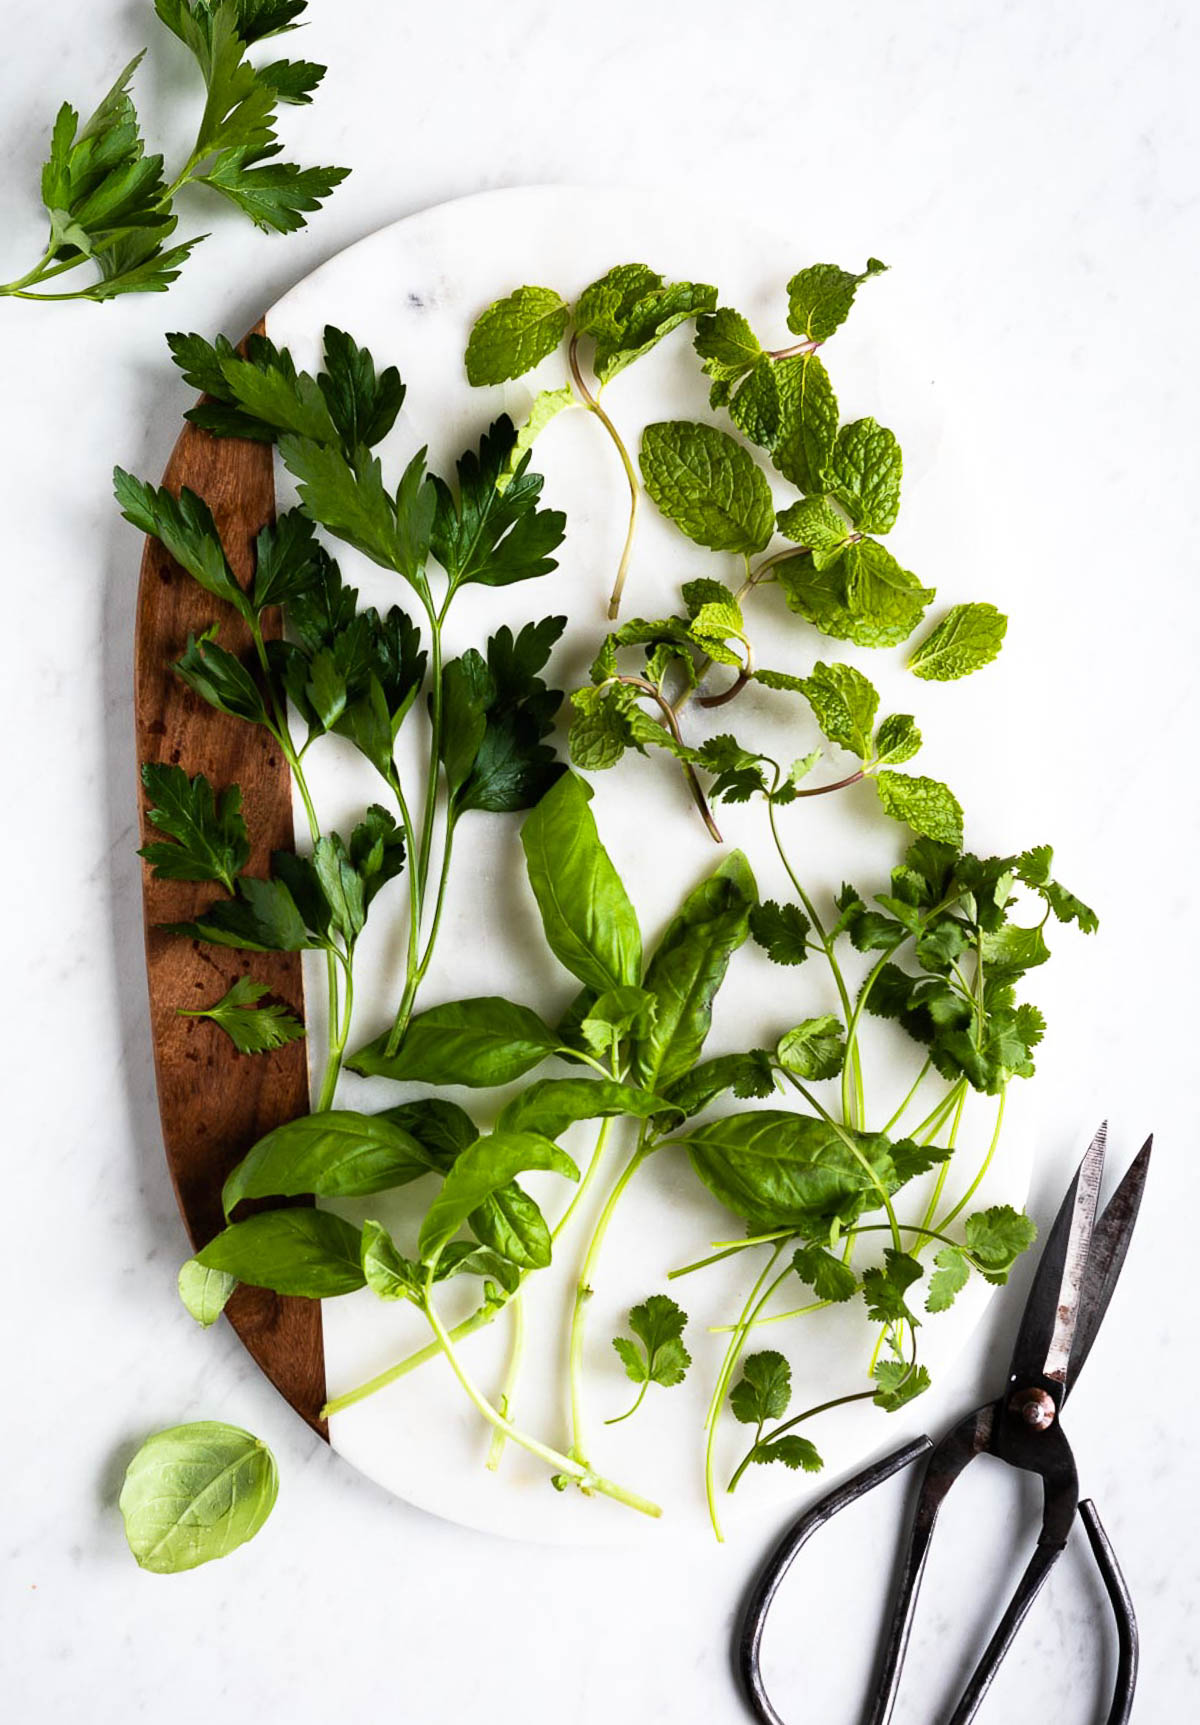 marble and wooden cutting board of fresh herbs next to pruning shears.